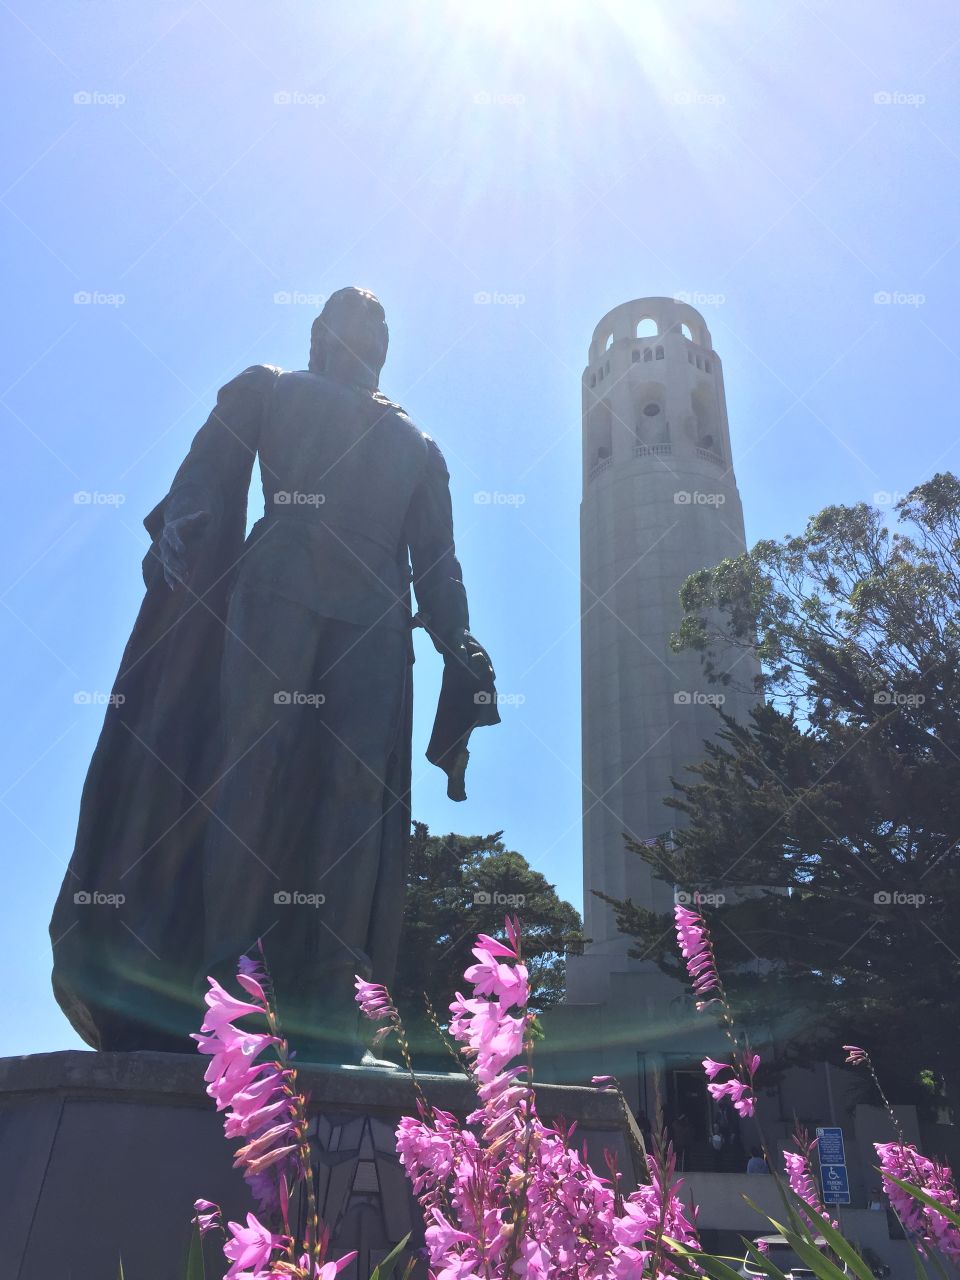 Christopher Columbus statue by the Coit Tower on Telegraph Hill in San Francisco, California 